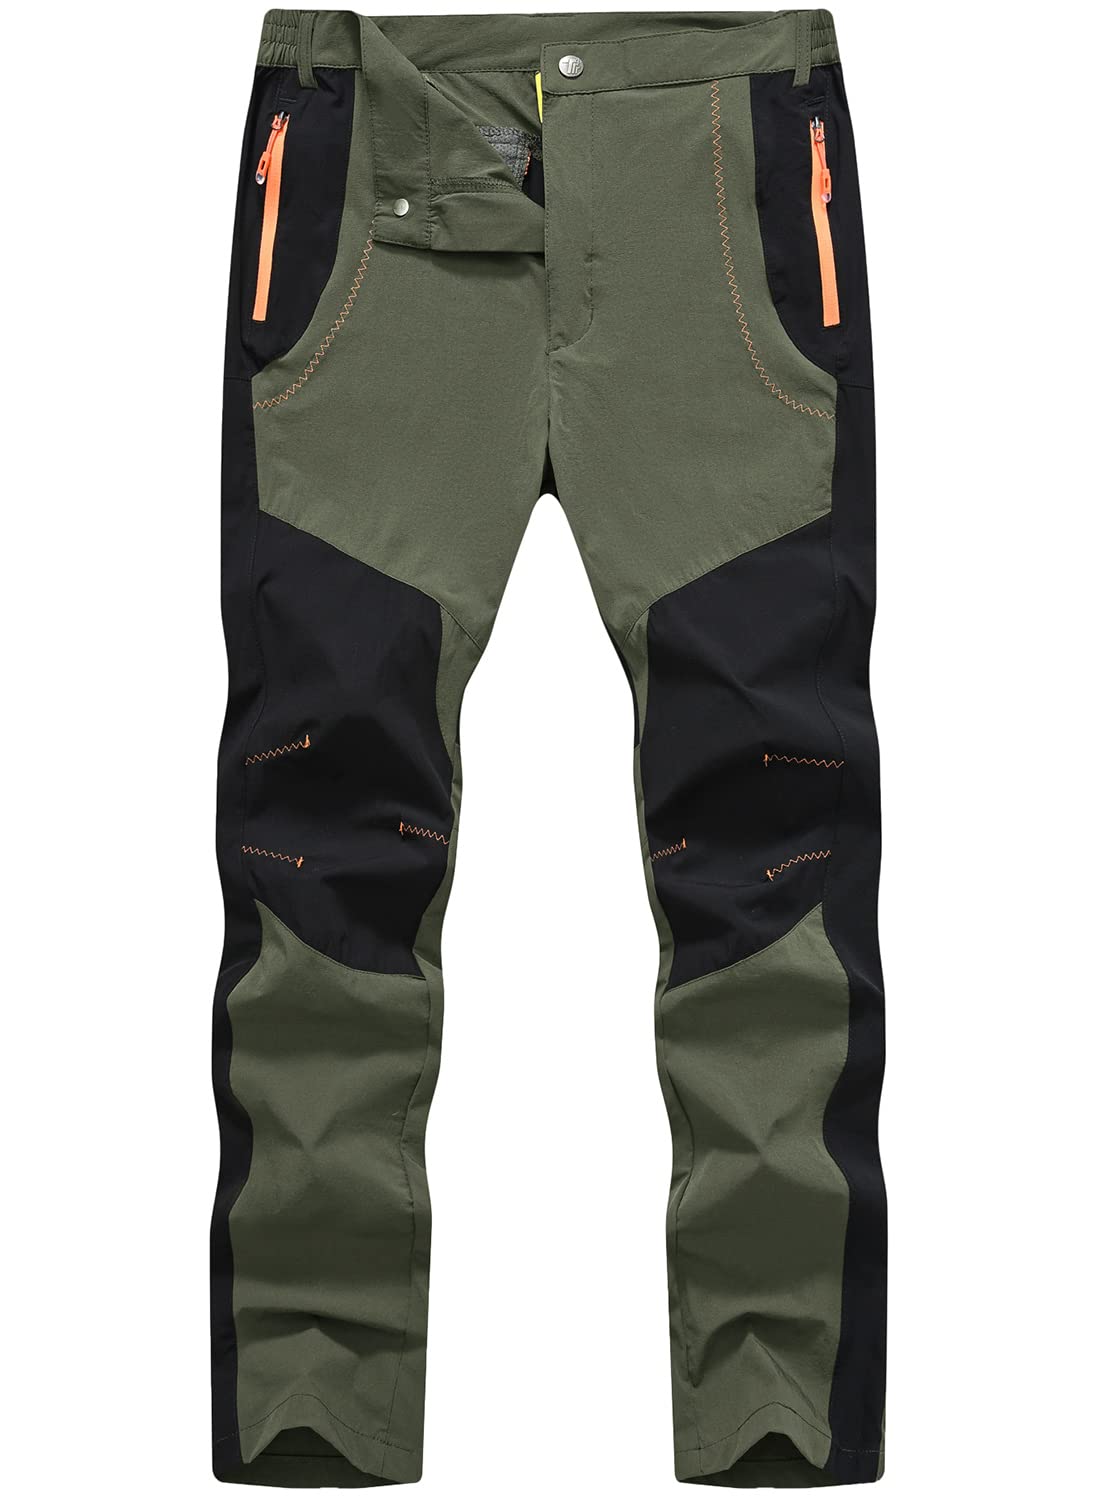 Baggy Cargo Pants for Men Hiking Climbing Trousers Mens Waterproof  Lightweight Tactical Work Pants for Men Green Medium : Amazon.in: Clothing  & Accessories